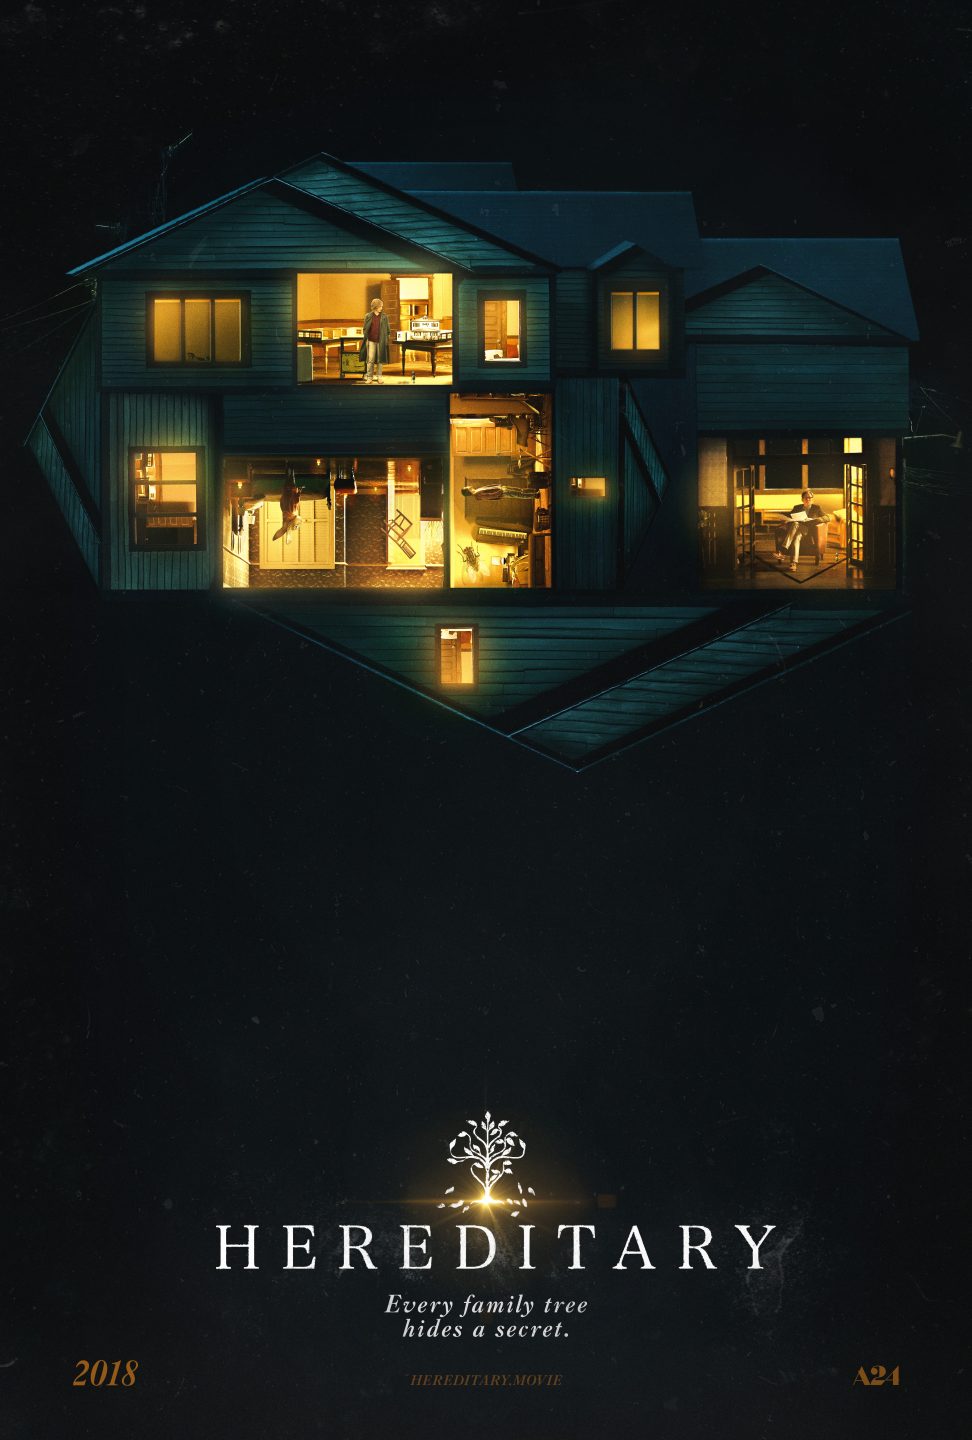 Hereditary poster (A24 Films)